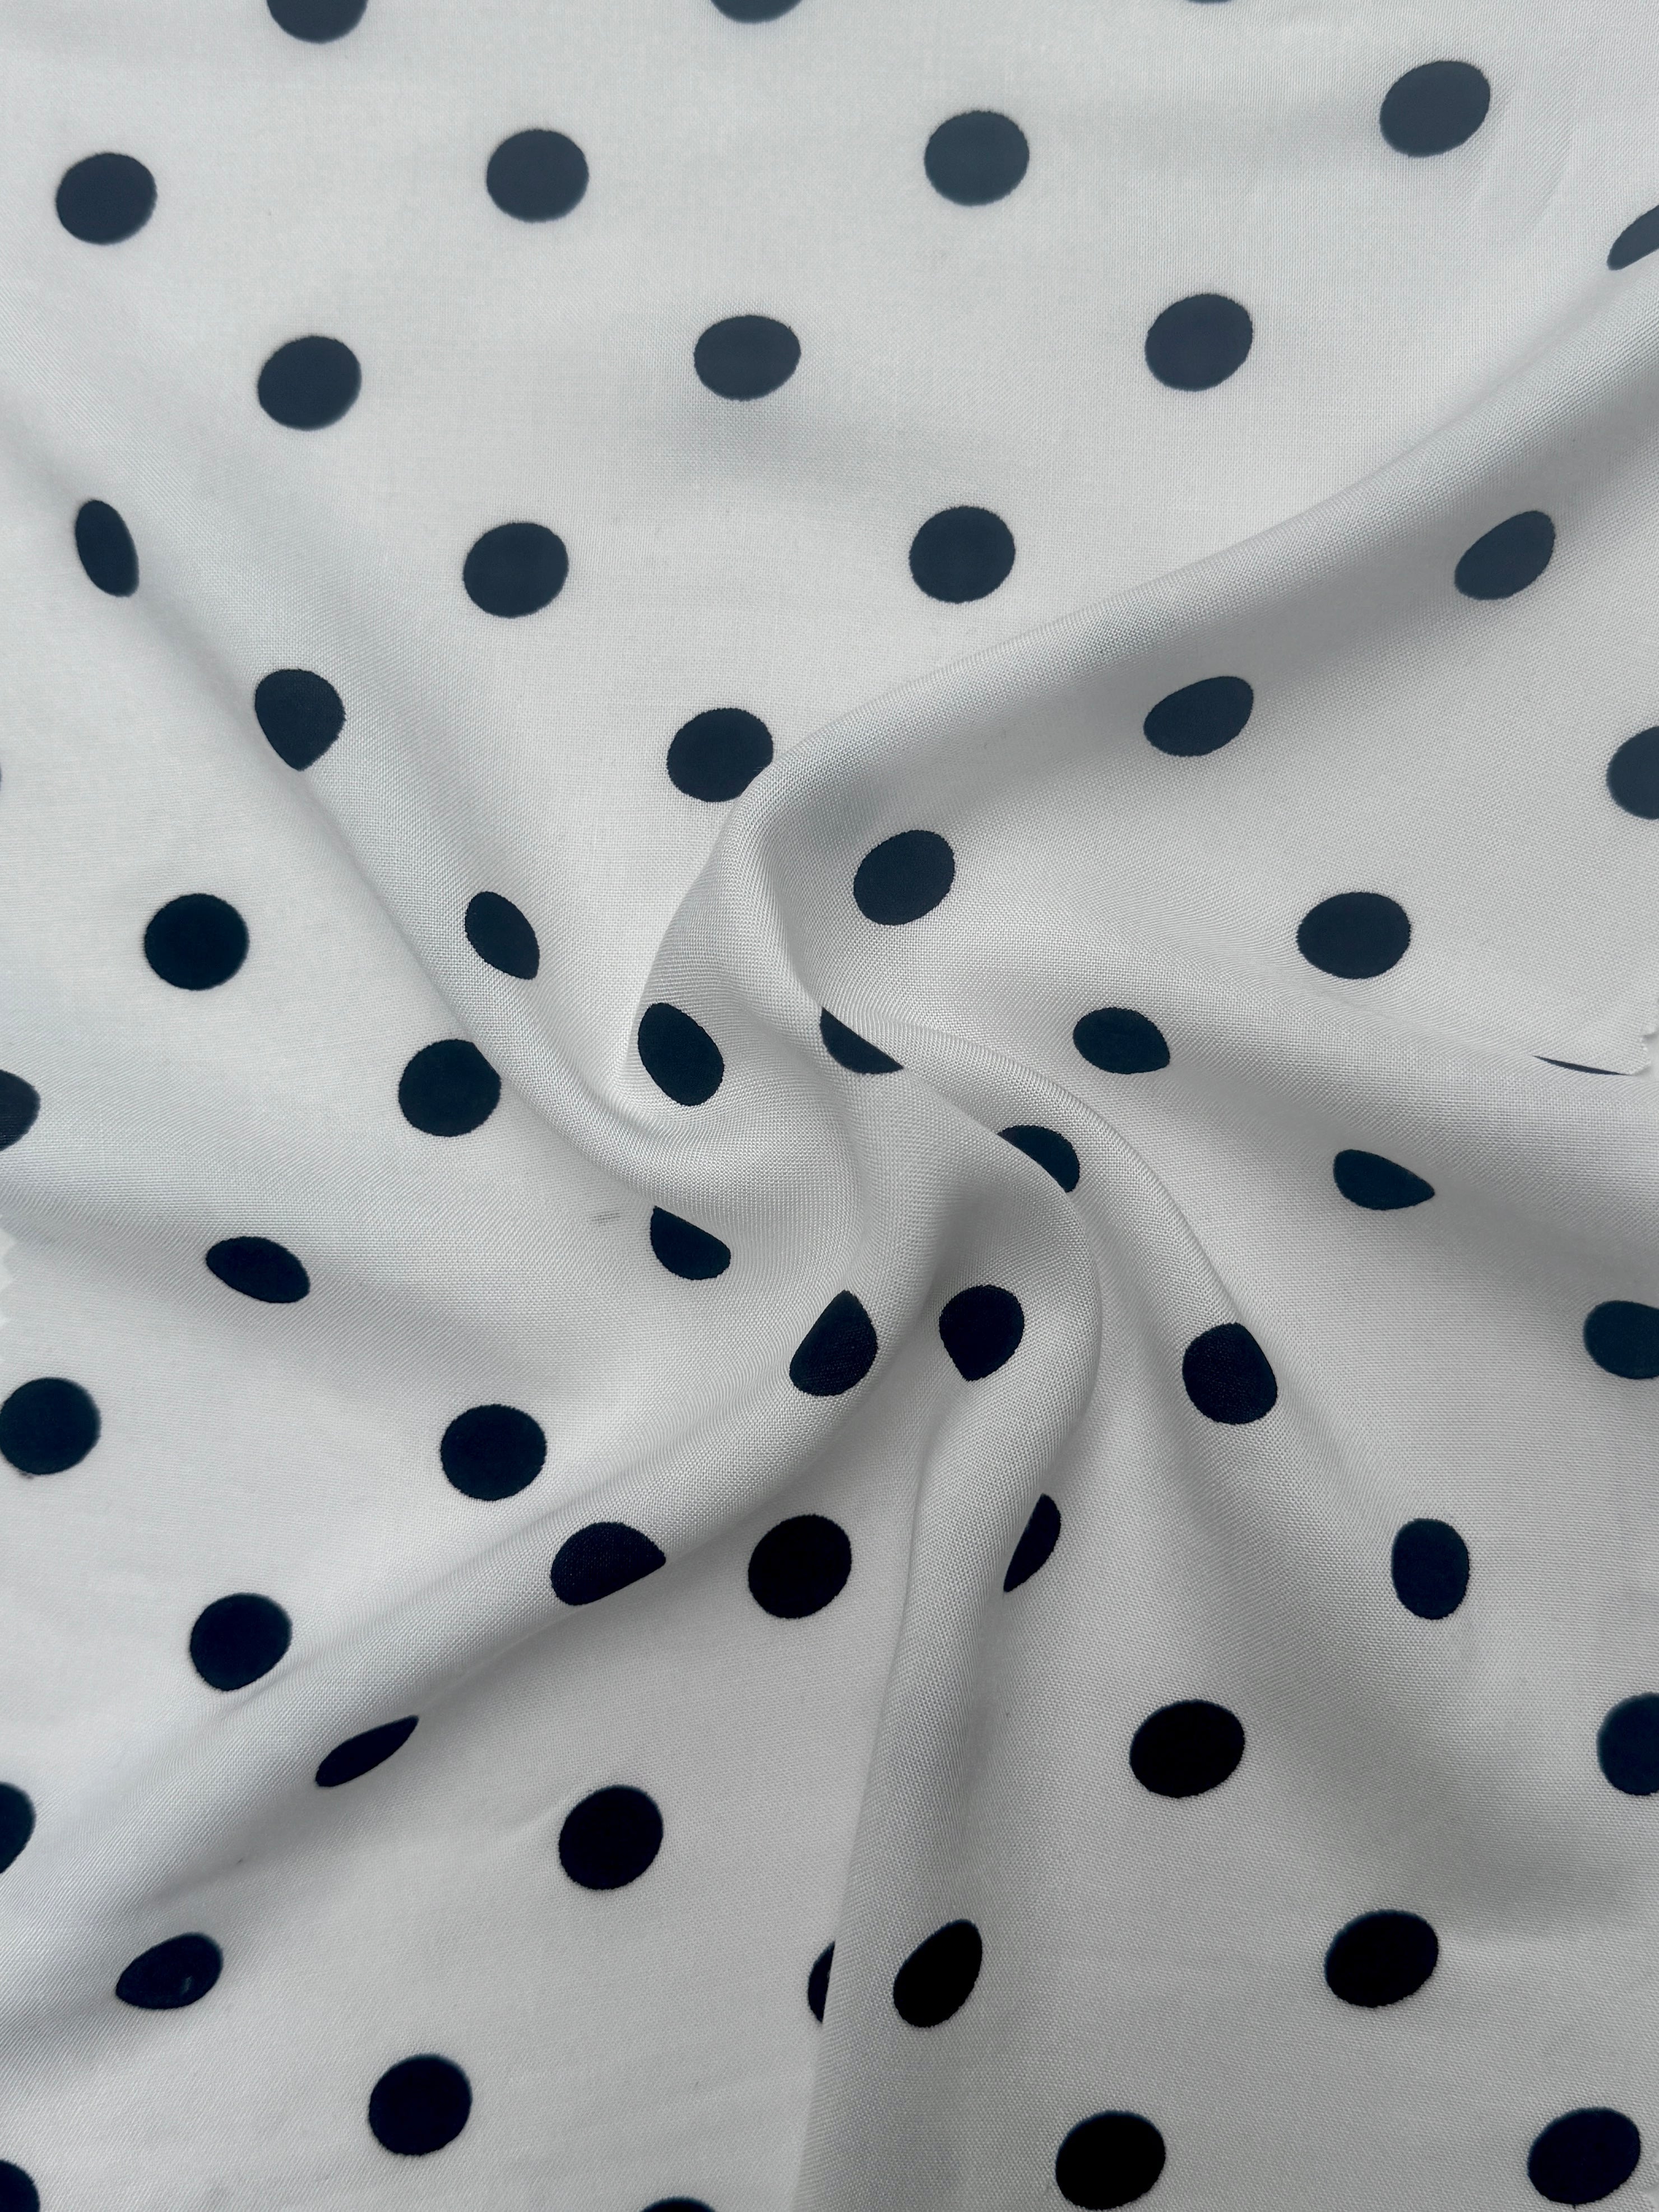 Black Polka dots on White Rayon Challis, online textile store, sewing, fabric store, sewing store, cheap fabric store, kiki textiles